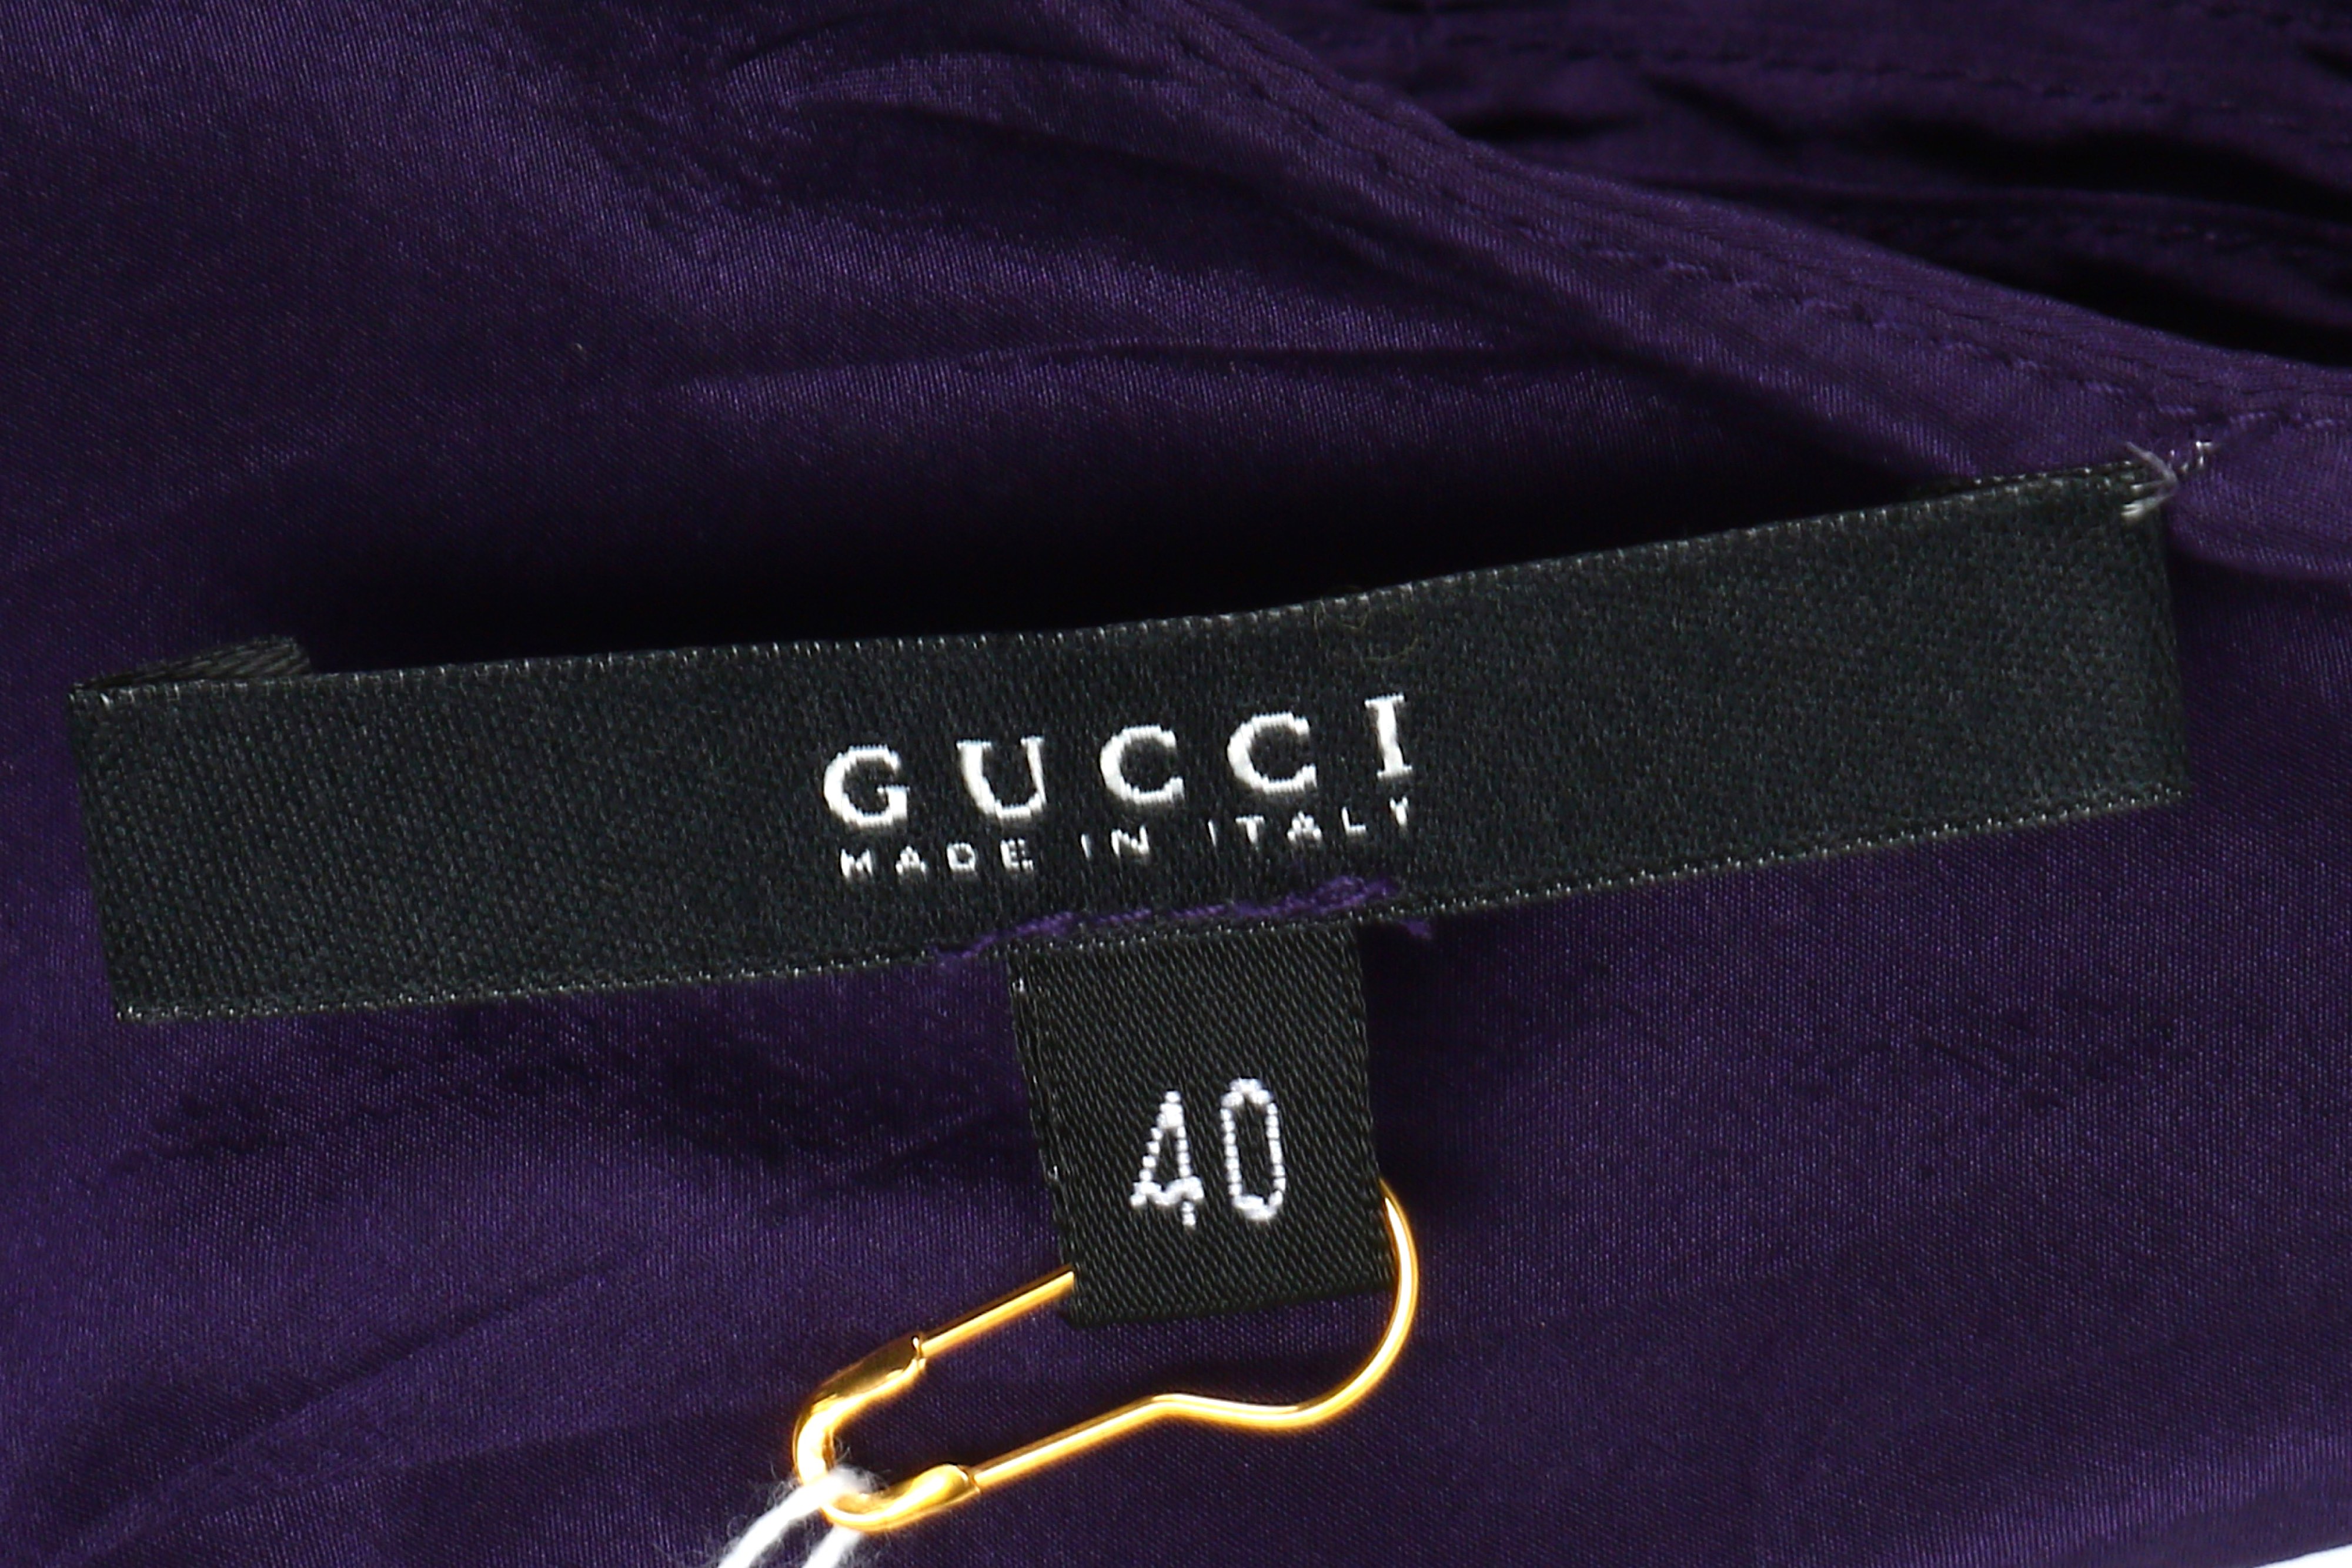 Tom Ford for Gucci Purple Silk Dress - size 40 - Image 7 of 7